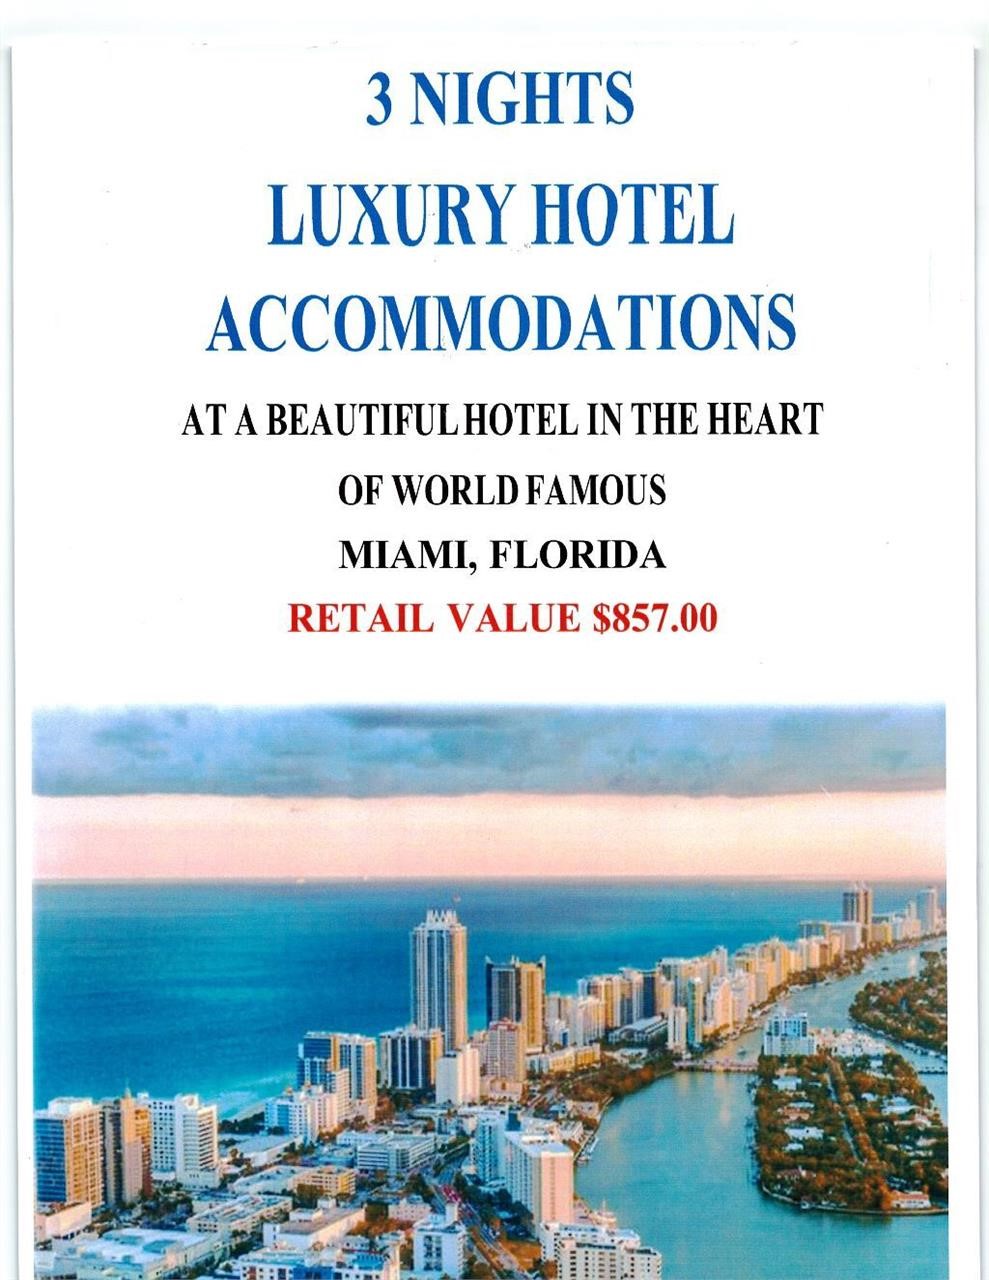 June 13TH. Vacation Hotel Accommodation Packages Auction